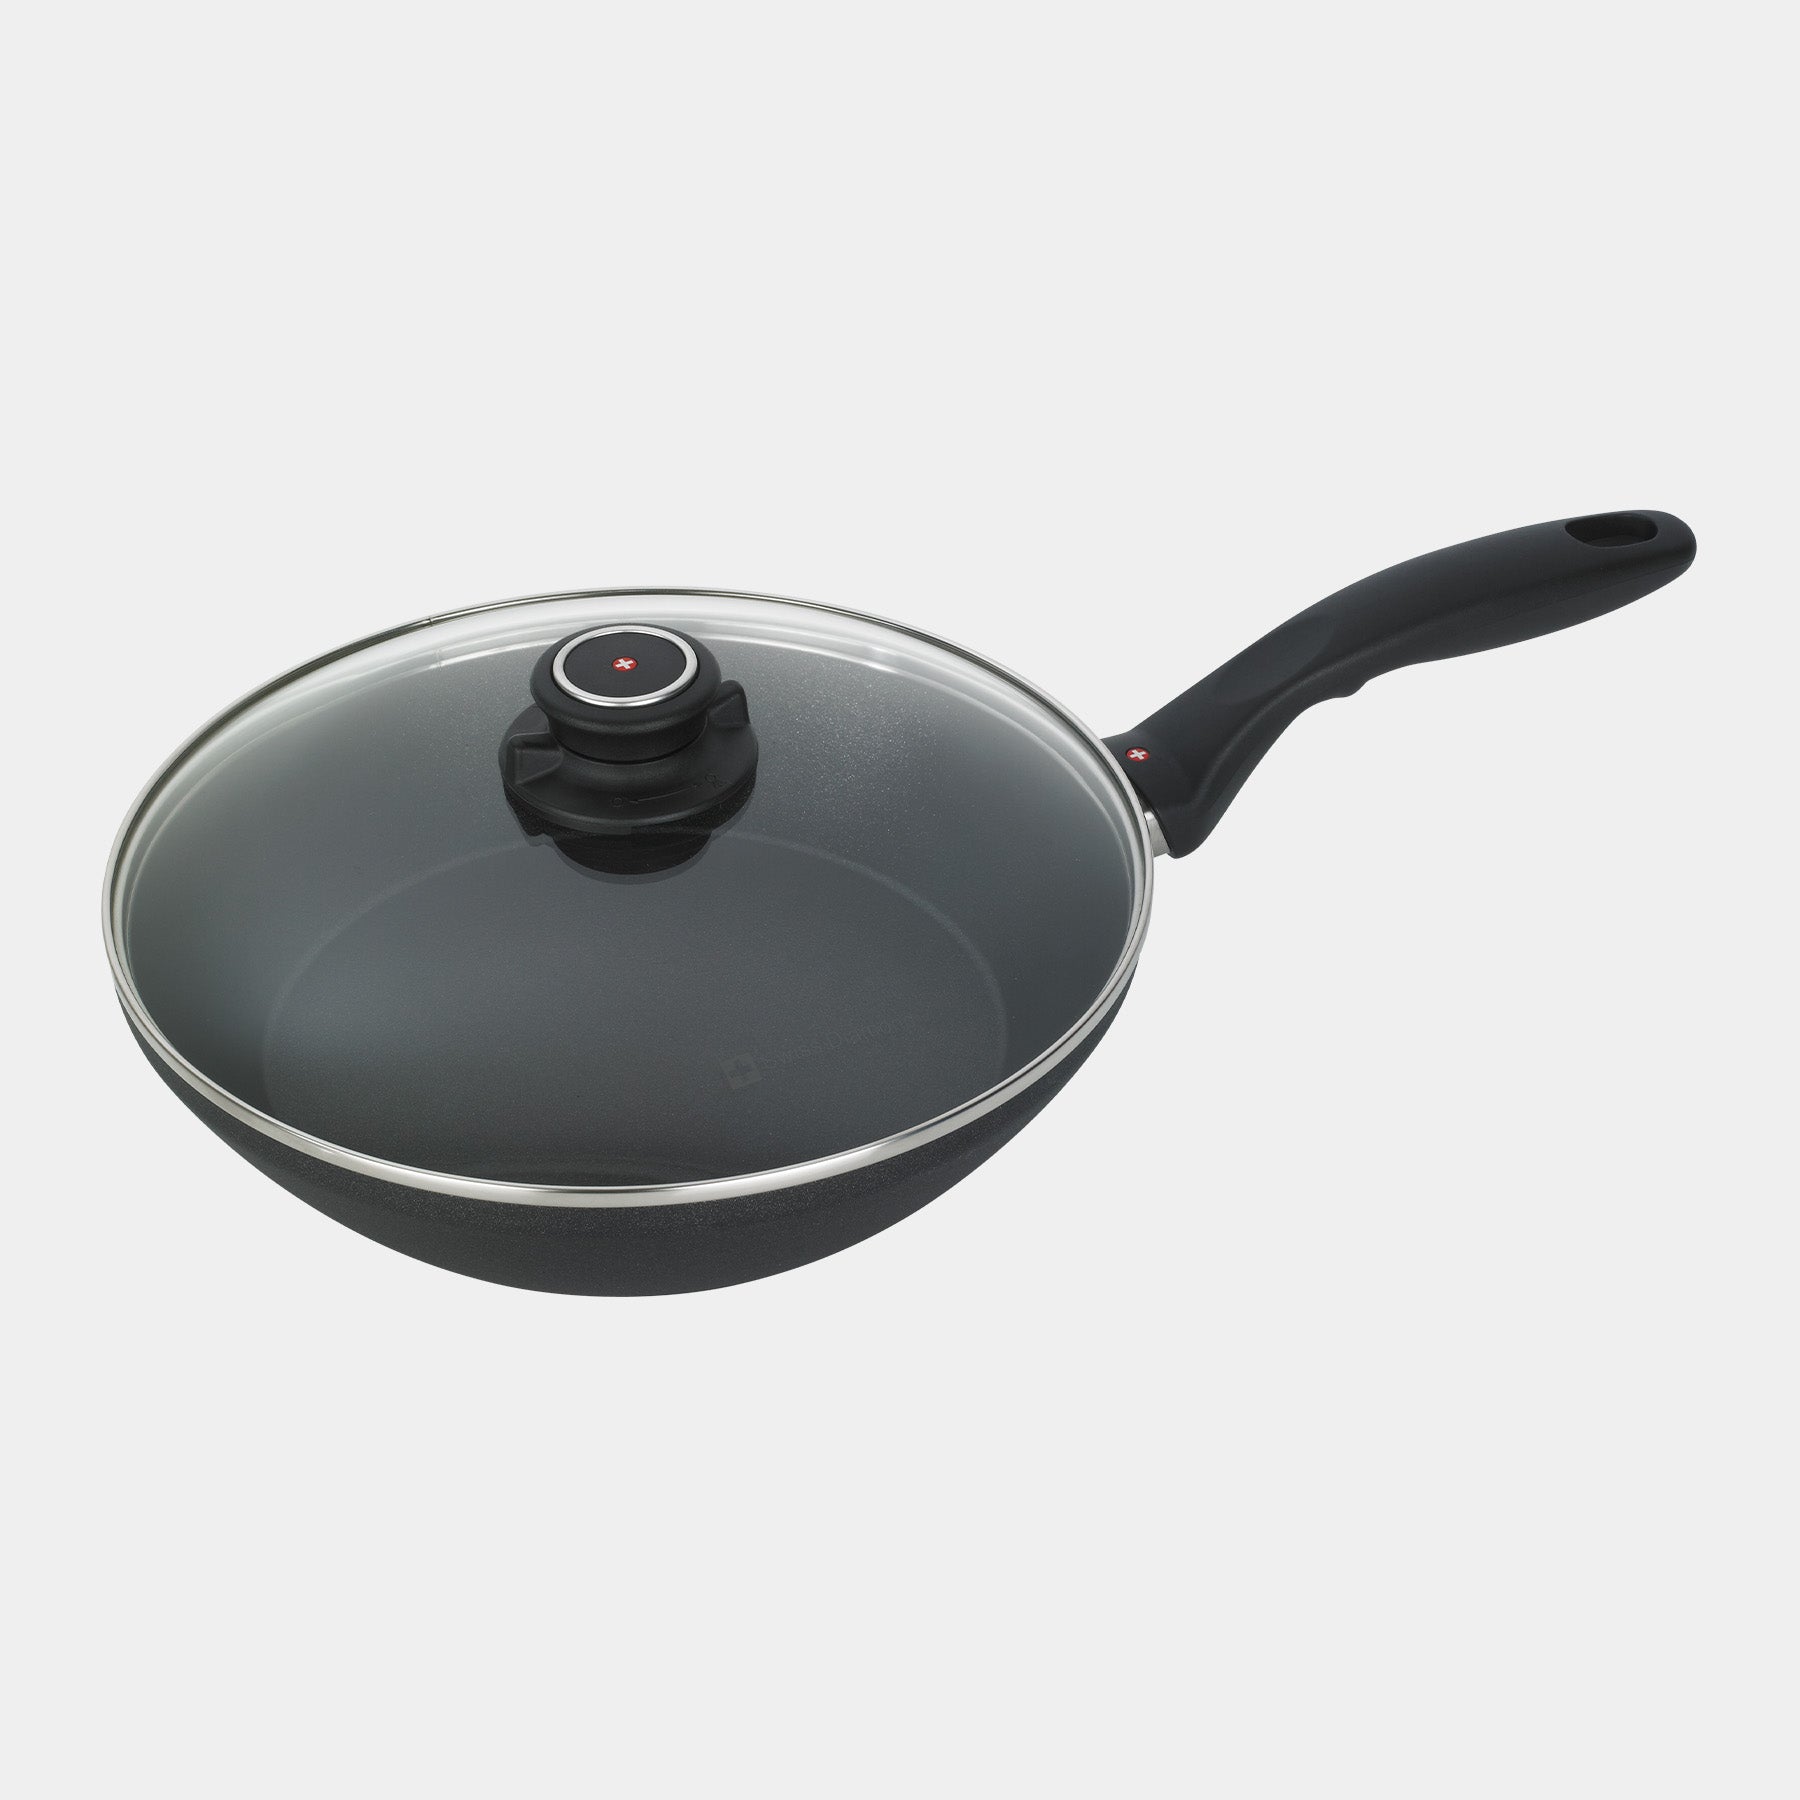 XD Nonstick 10.25" Stir-Fry Pan with Glass Lid - Induction